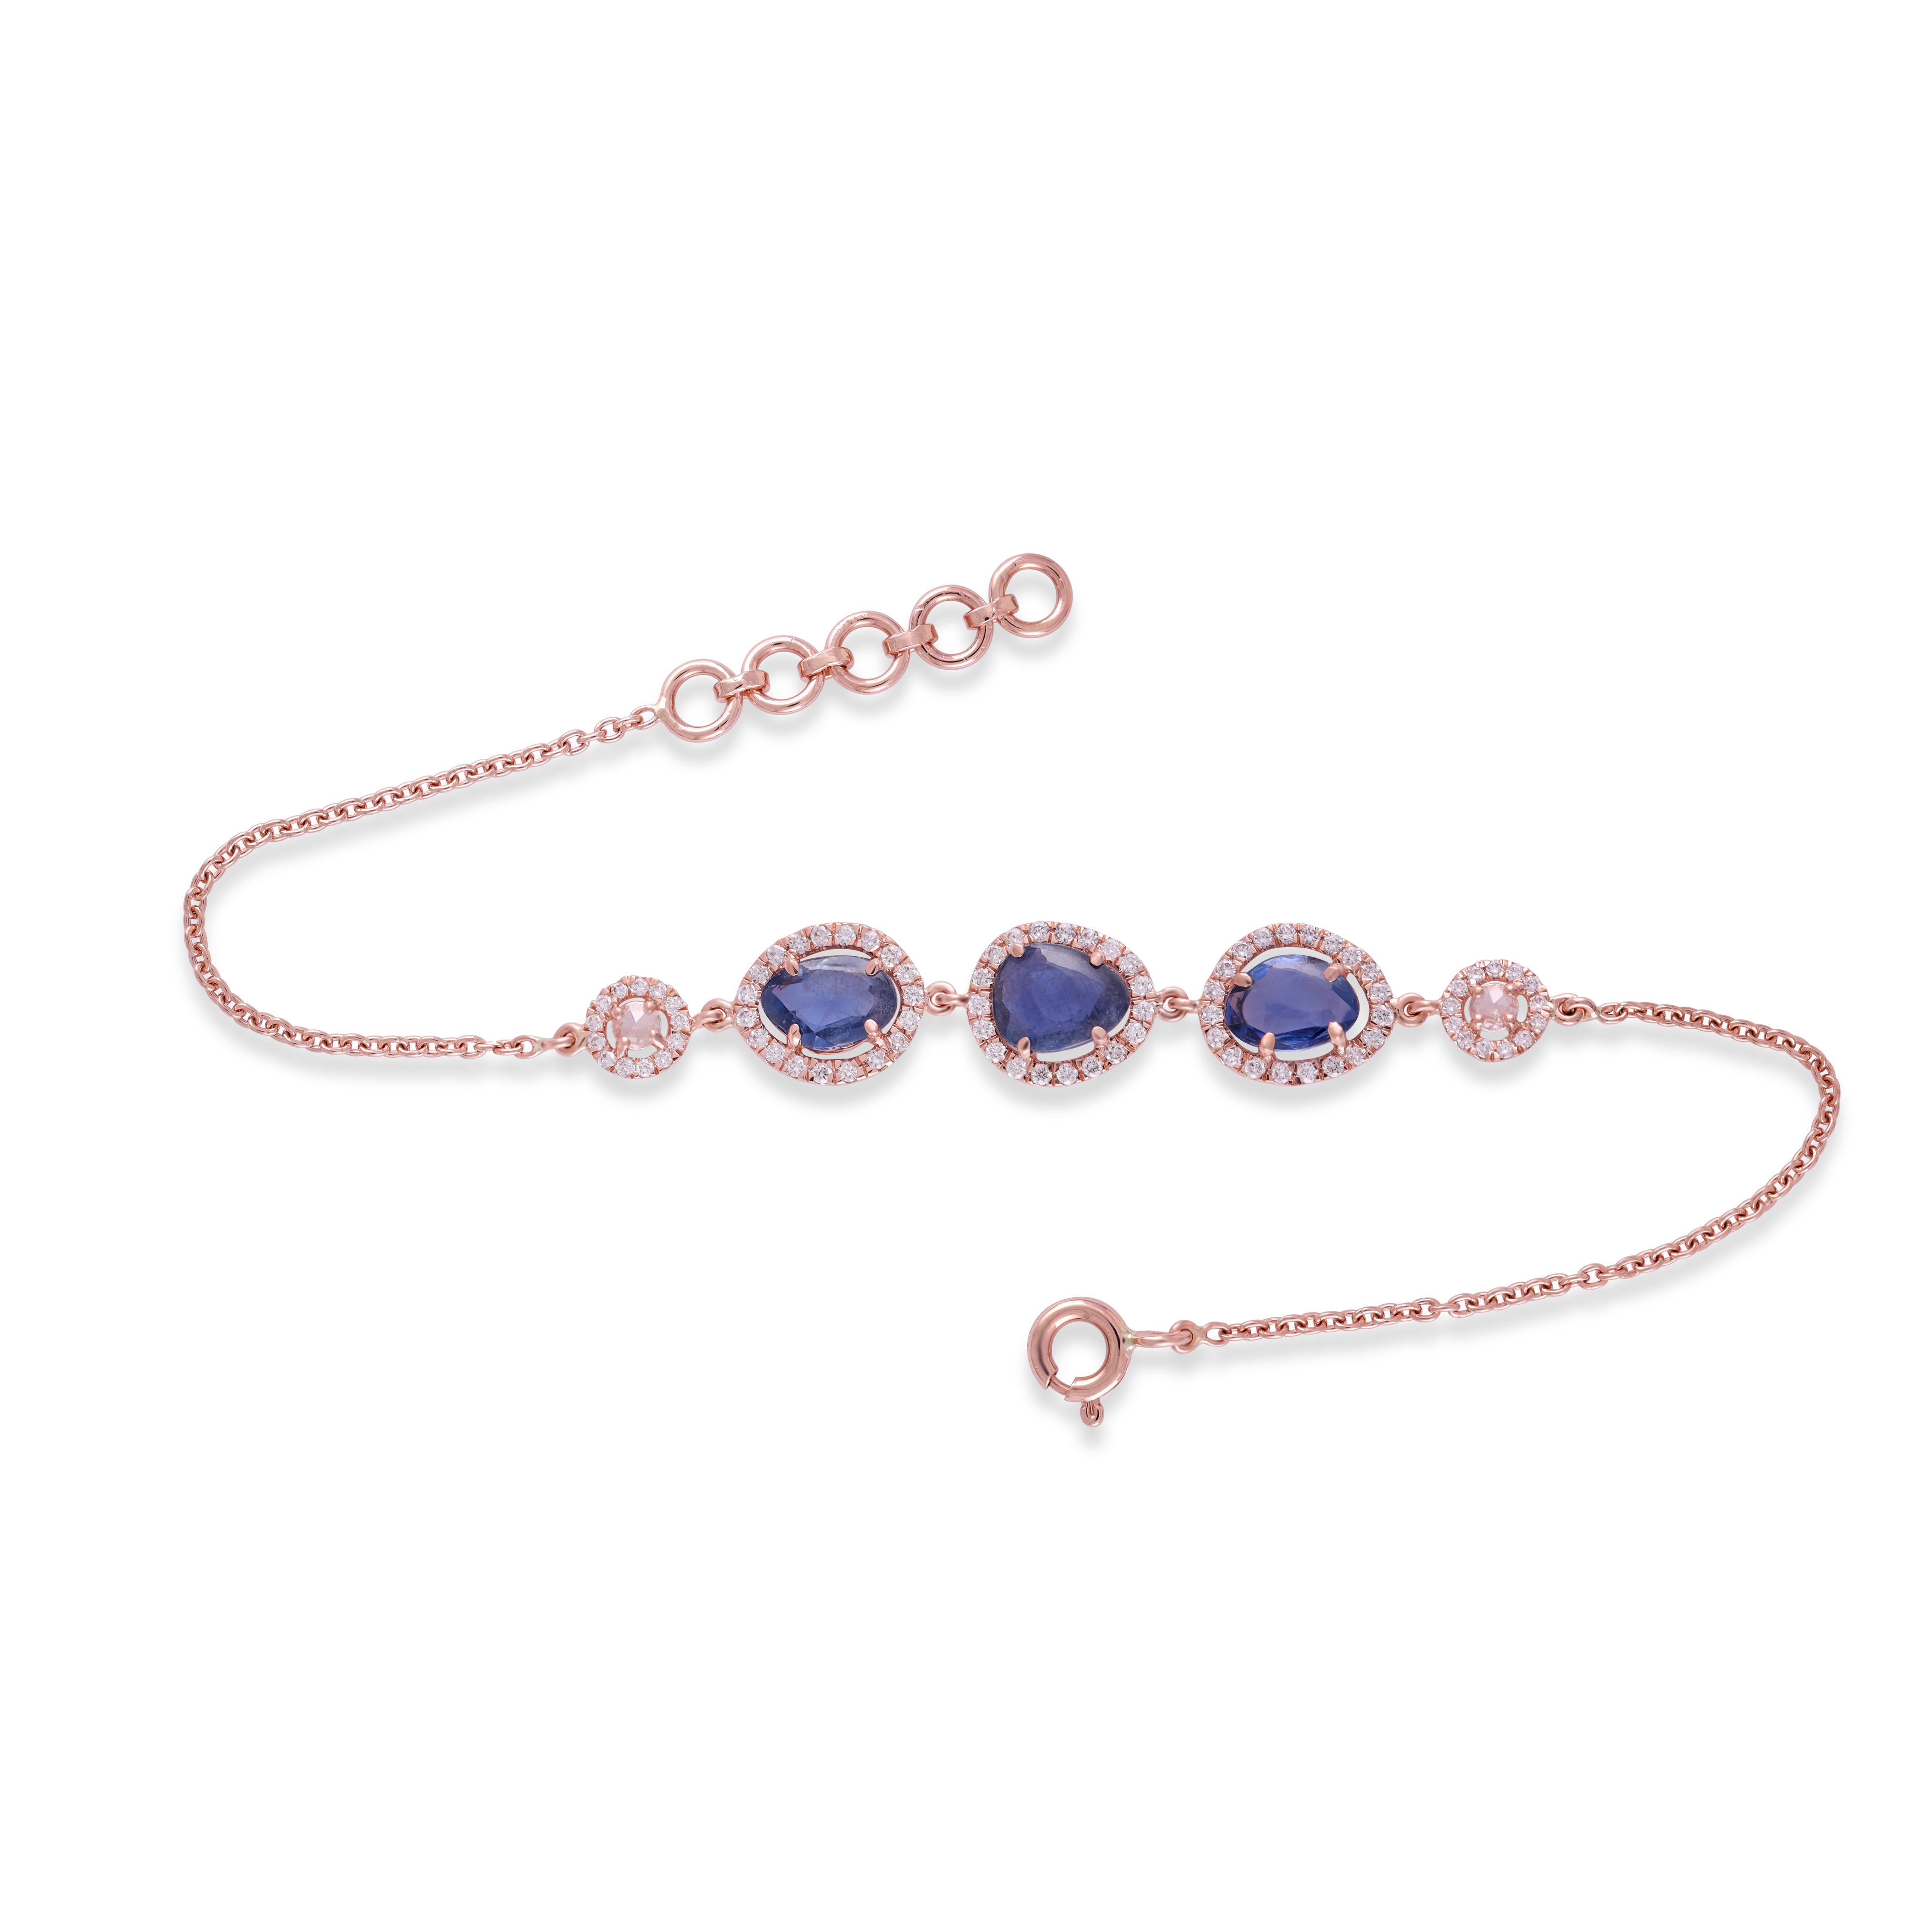 A very beautiful and dainty Sapphire Chain Bracelet let in 18K Rose Gold & Diamonds. The weight of the Sapphires is 2.77 carats. The weight of the Diamonds is 0.68 carats. 

Bracelet size - 6 - 7 inches and can be Resize.
